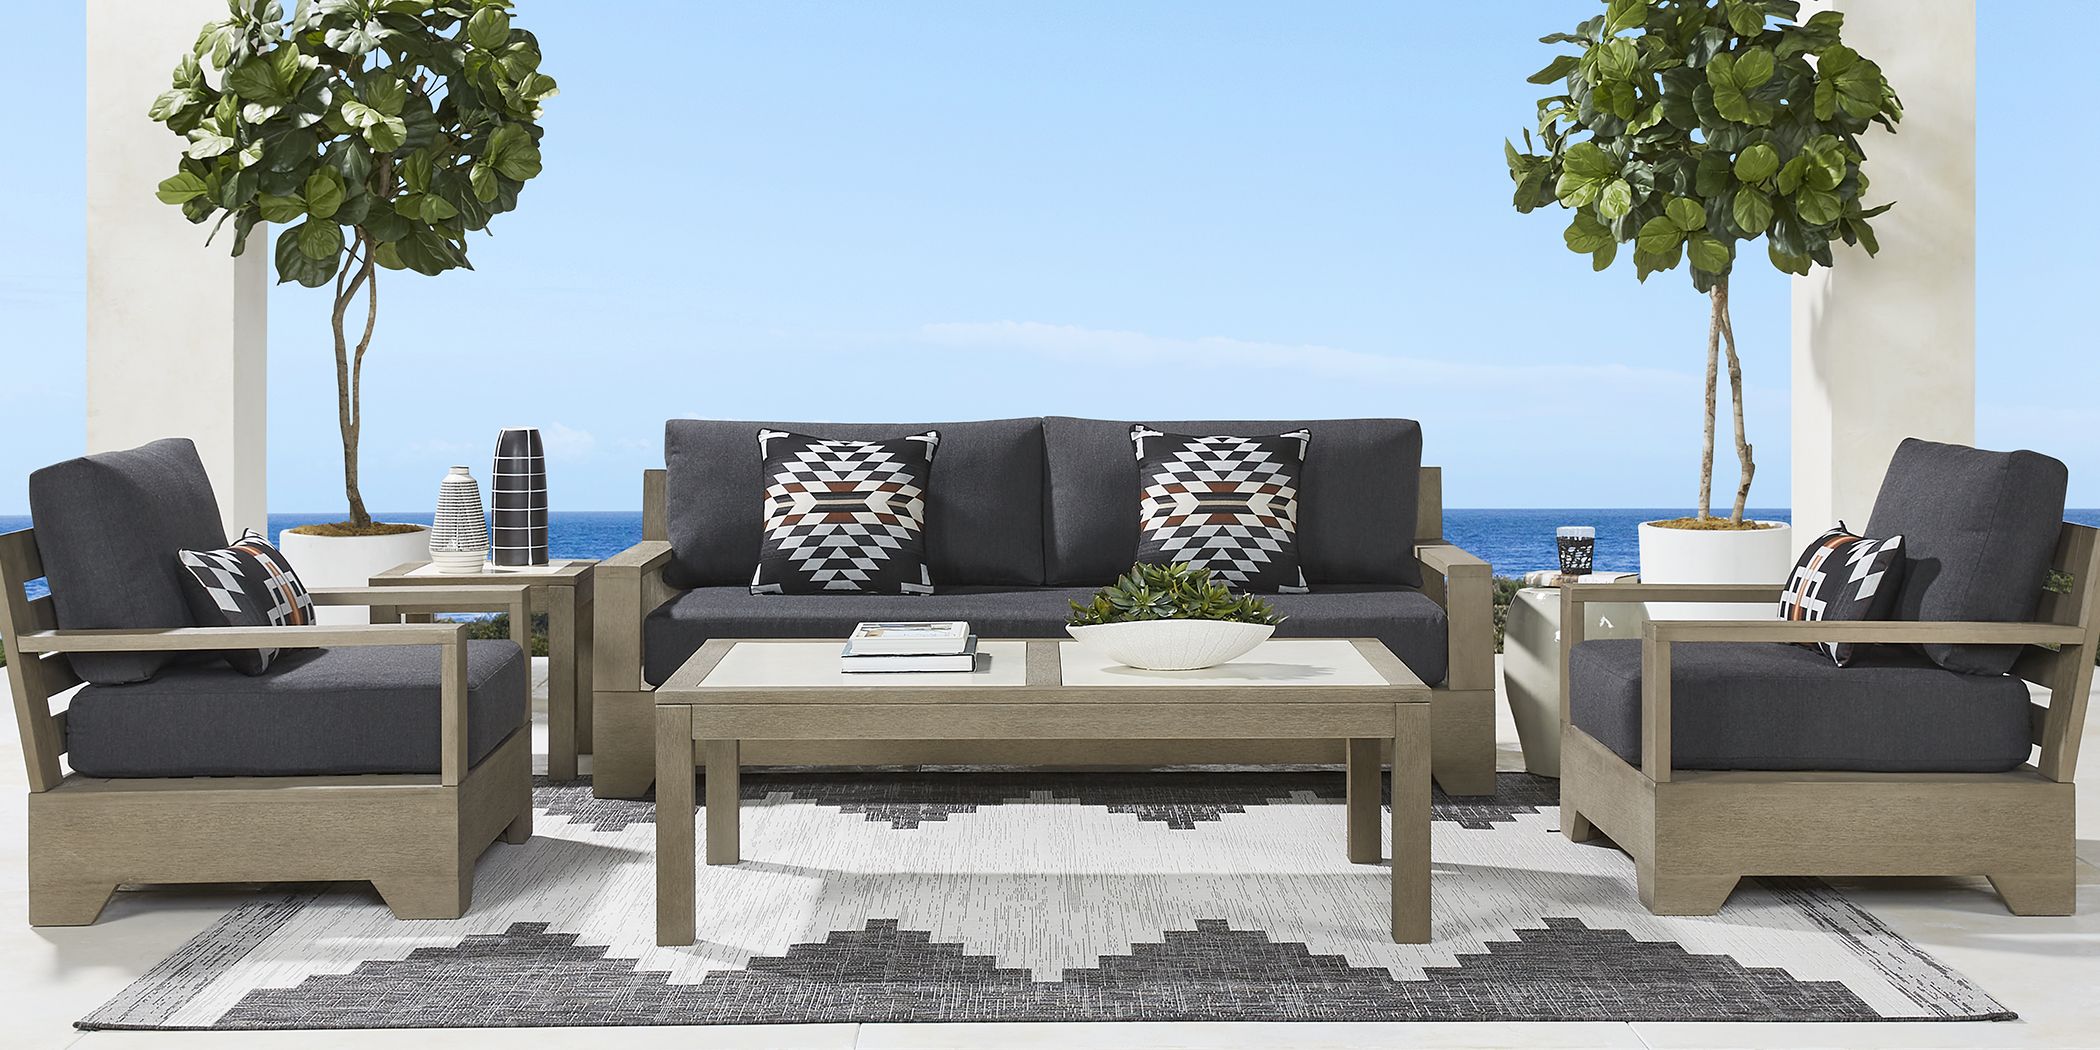 Cindy Crawford Home Lake Tahoe Gray 4 Pc Outdoor Seating Set with Charcoal Cushions